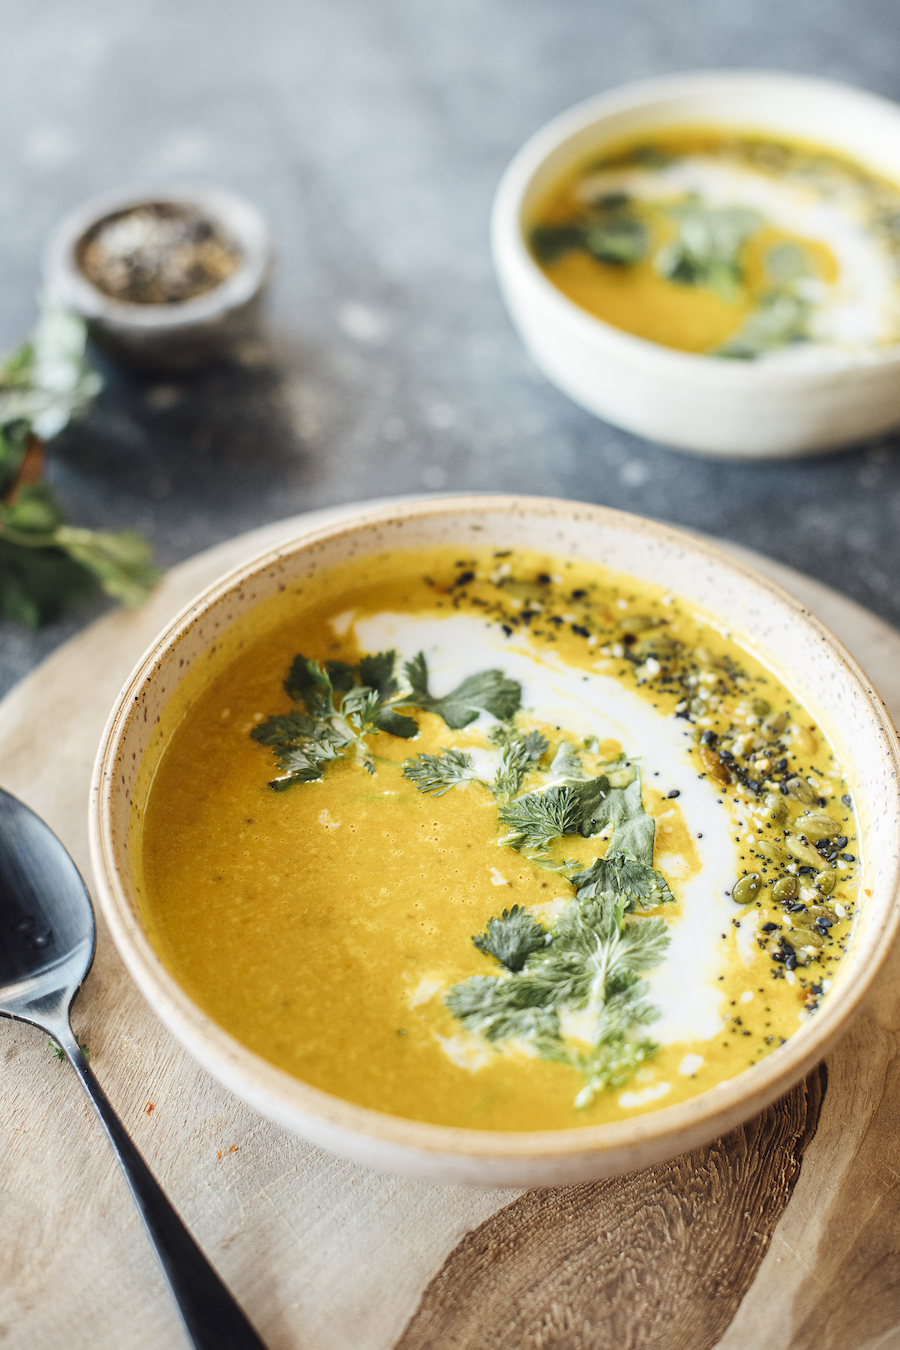 “Creamy” Vegan Butternut Squash Soup with Ginger & Coconut Milk